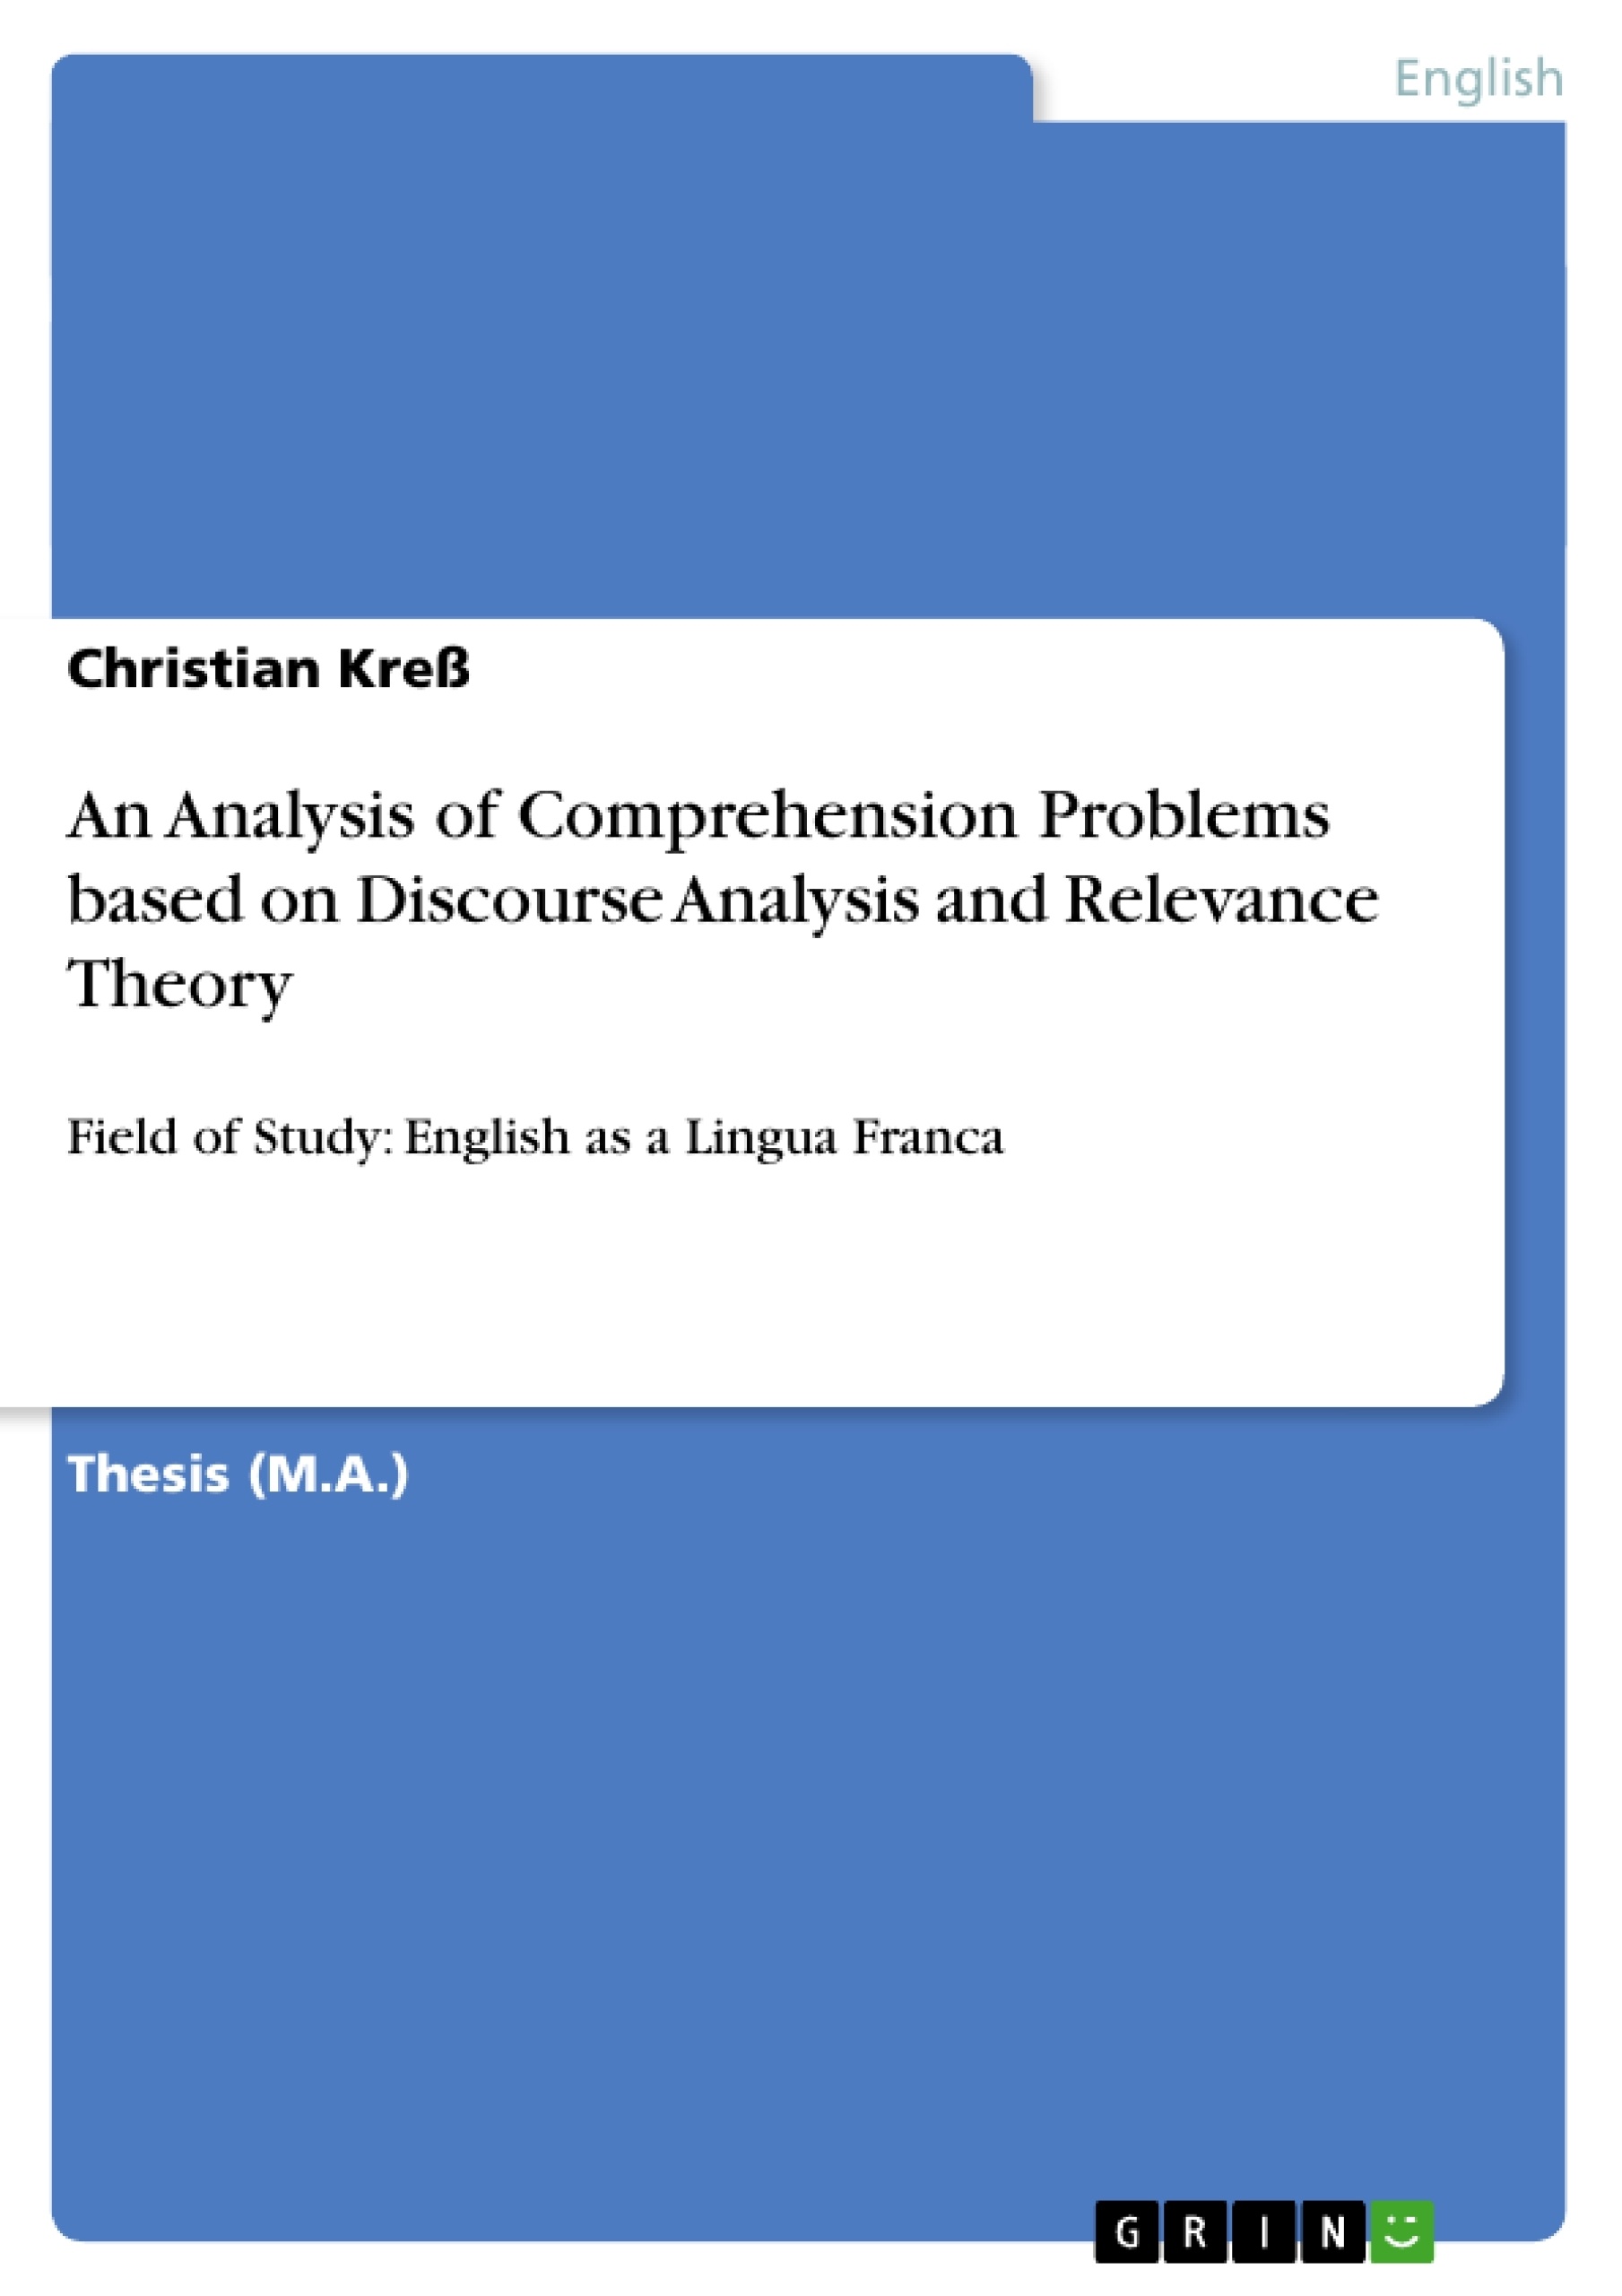 Title: An Analysis of Comprehension Problems based on Discourse Analysis and Relevance Theory